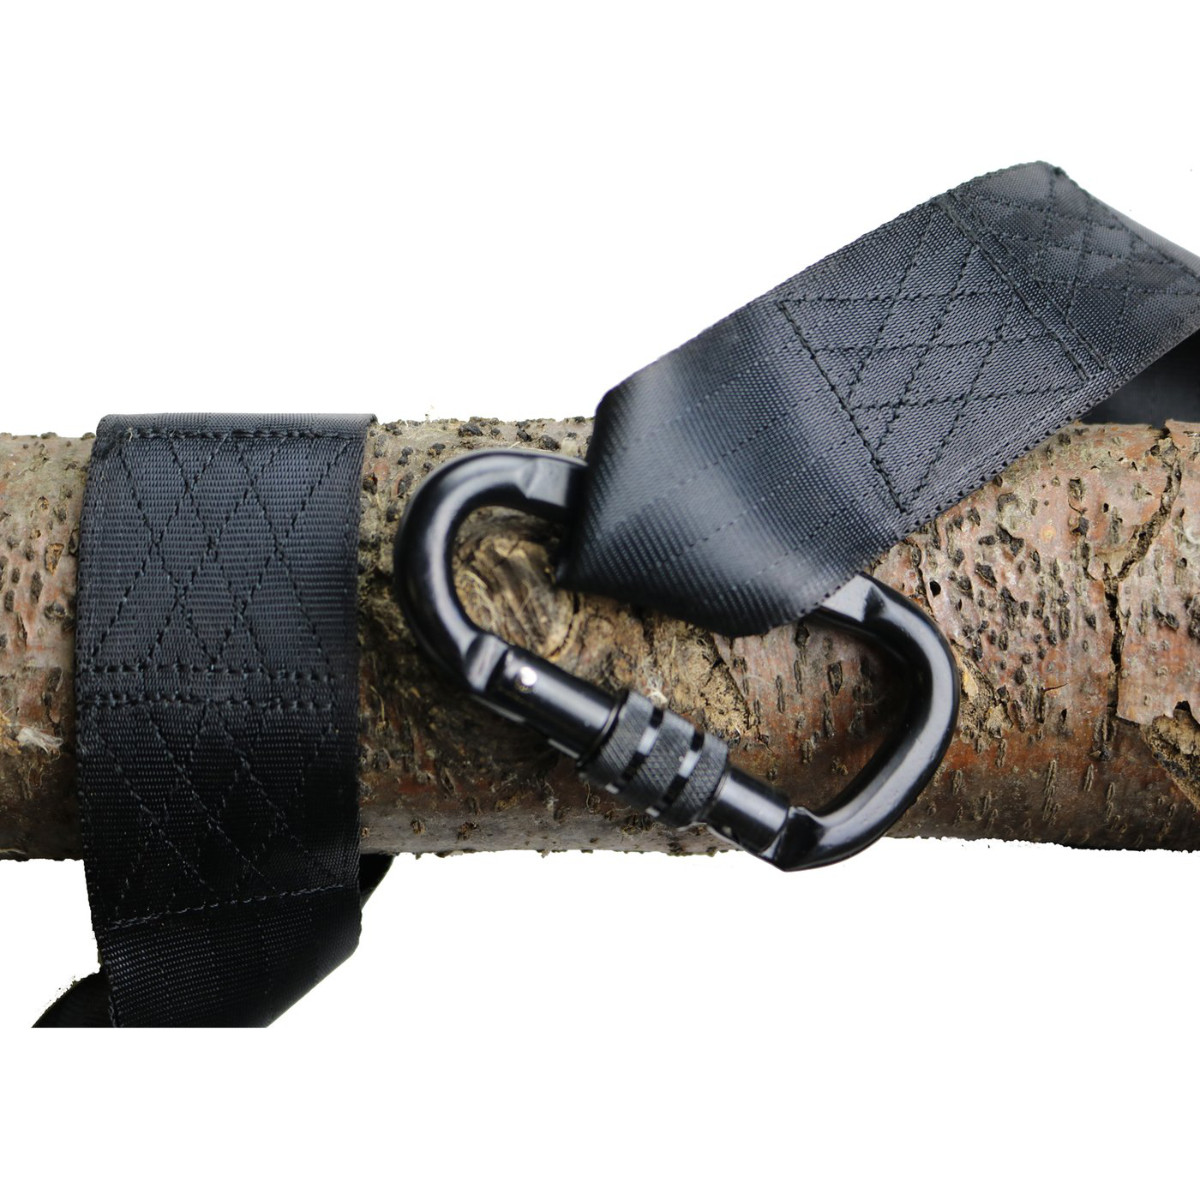  10 ft Tree Swing Strap with Carabiner (MM00149)